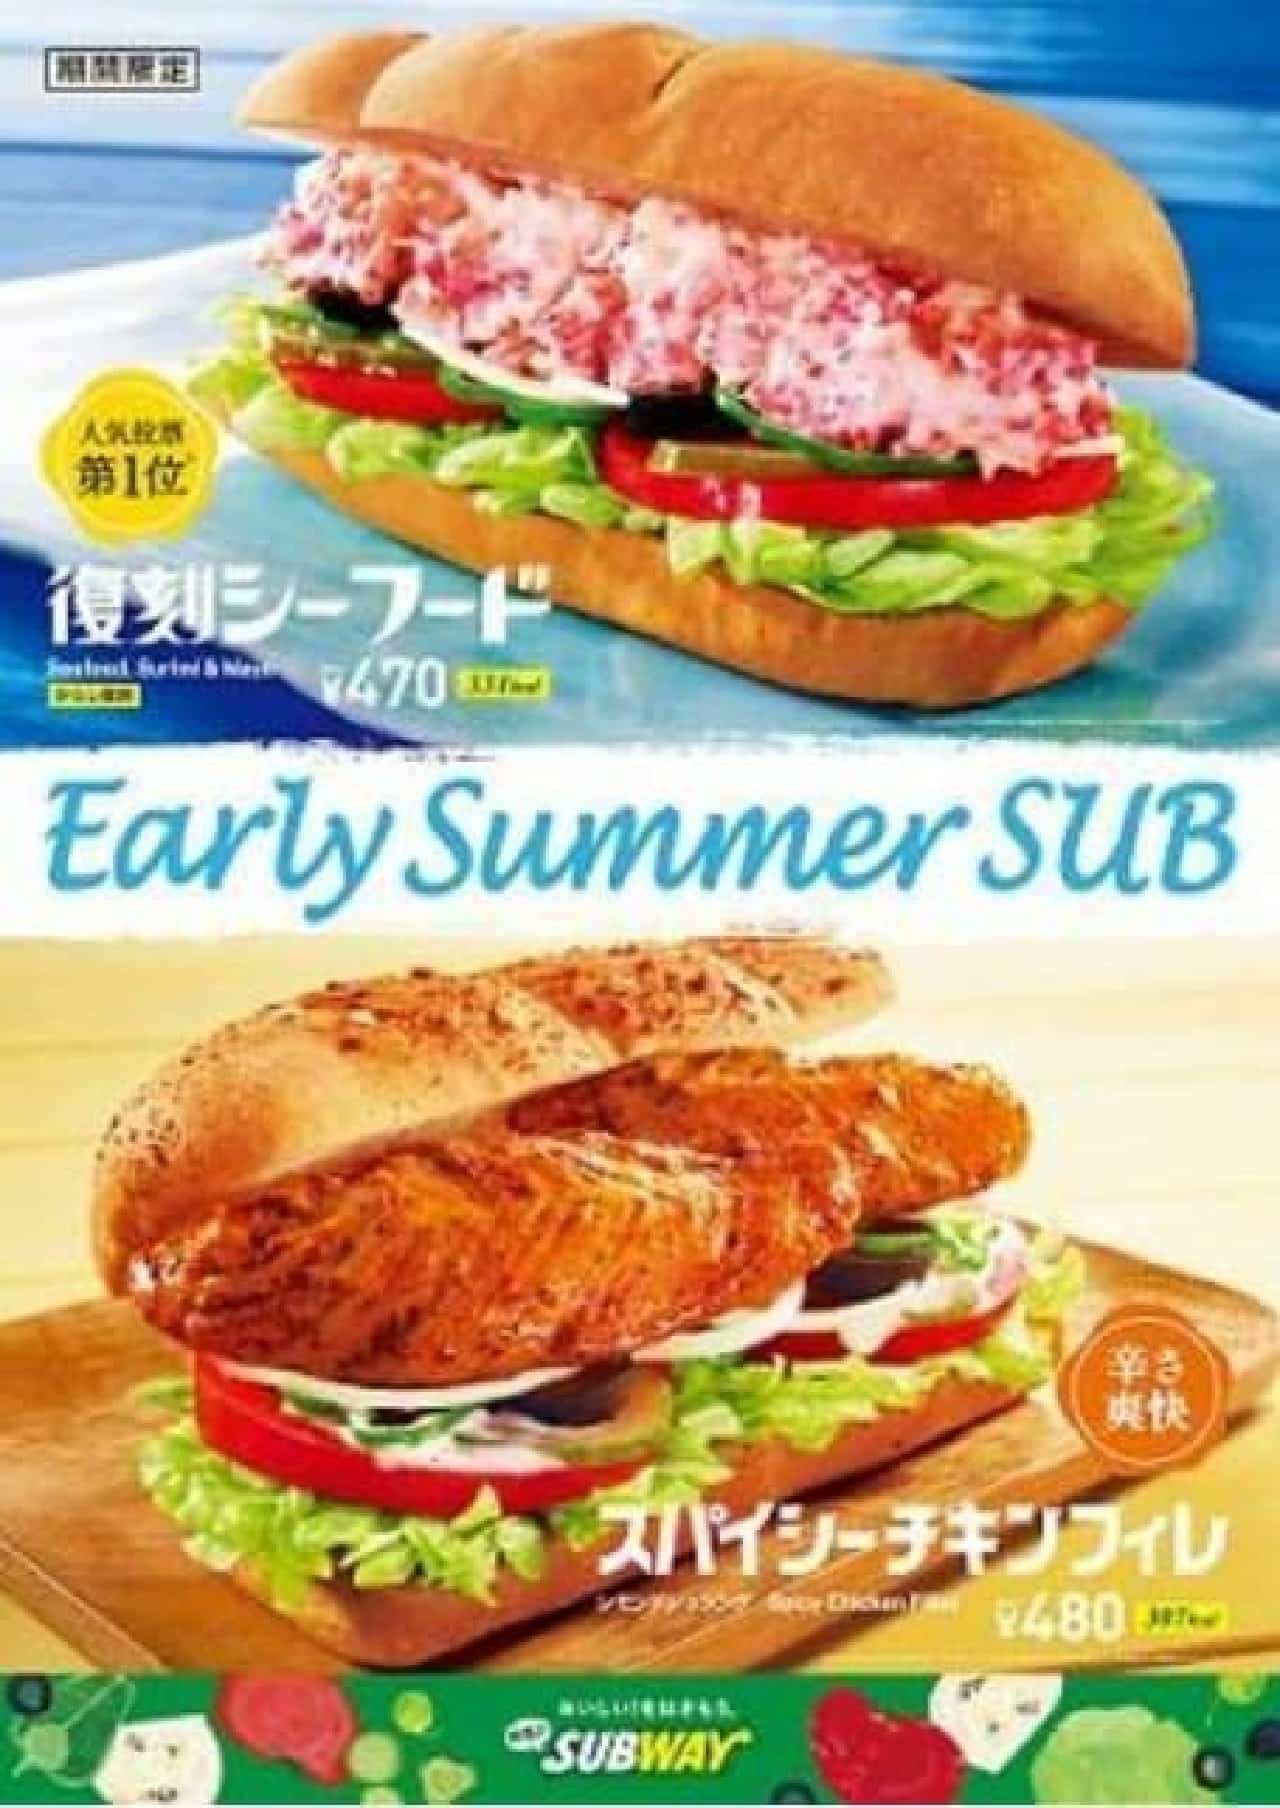 New menu for early summer on the subway